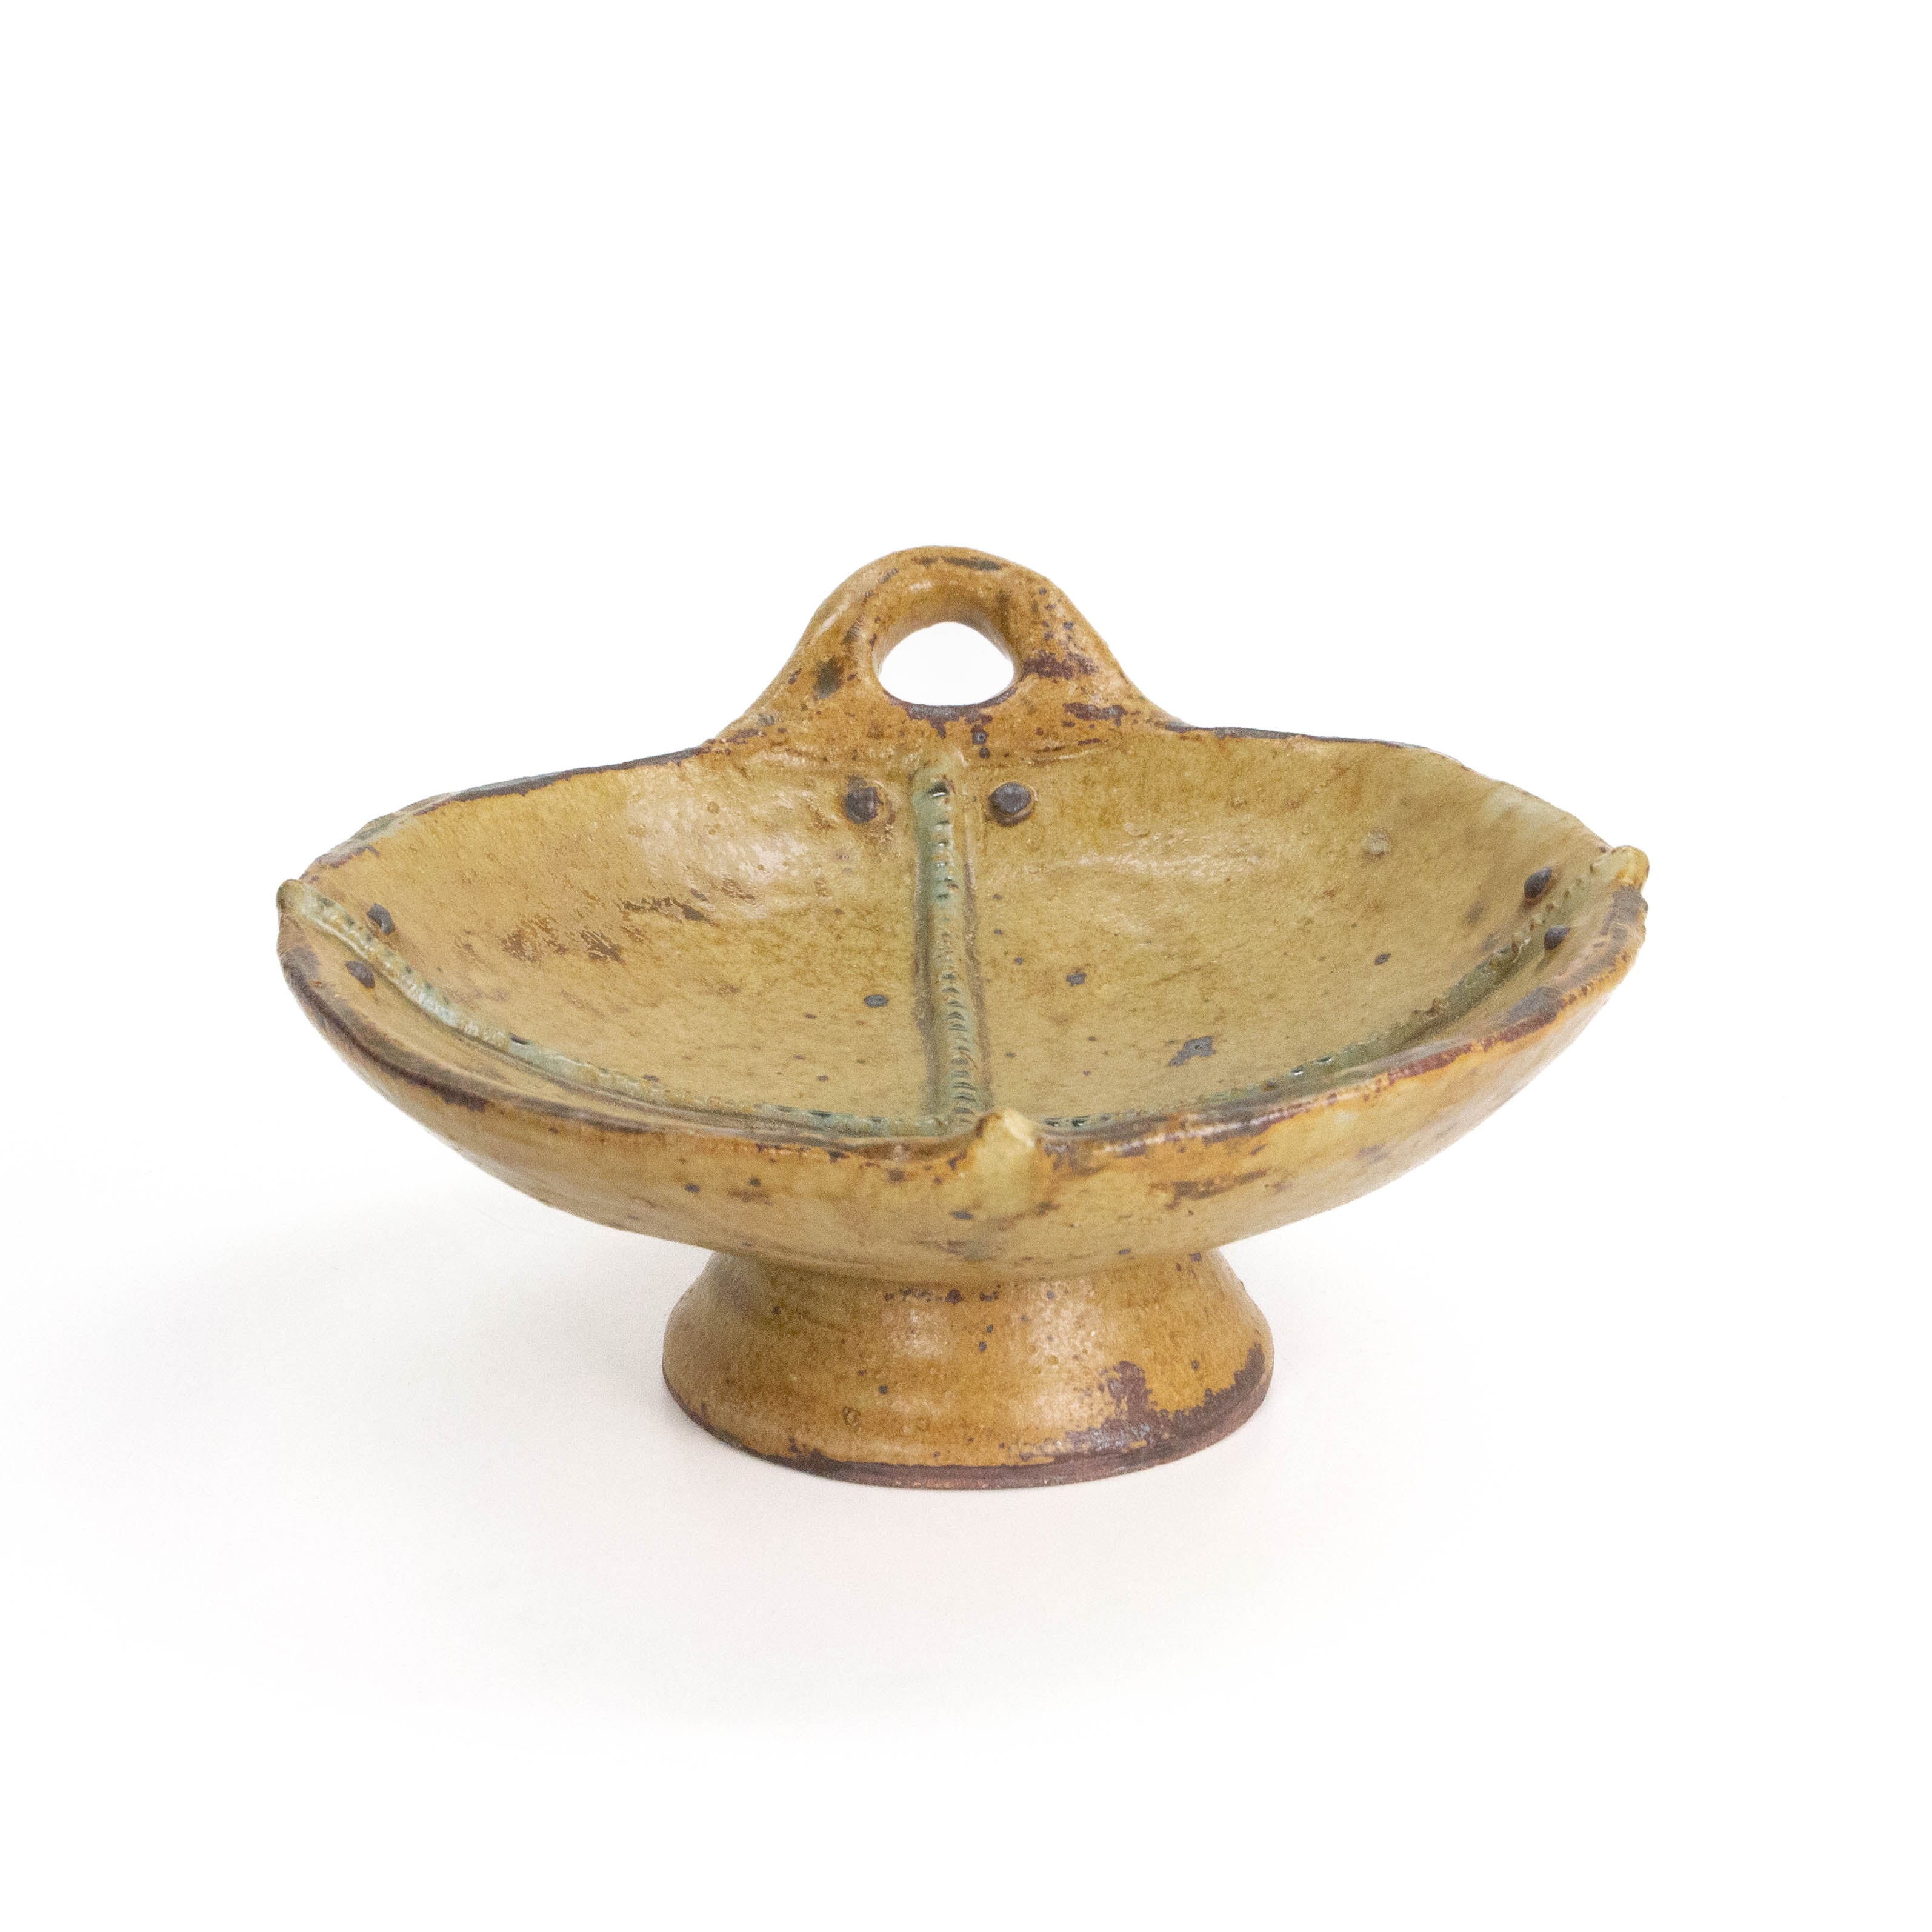 One-Handle Bowl*